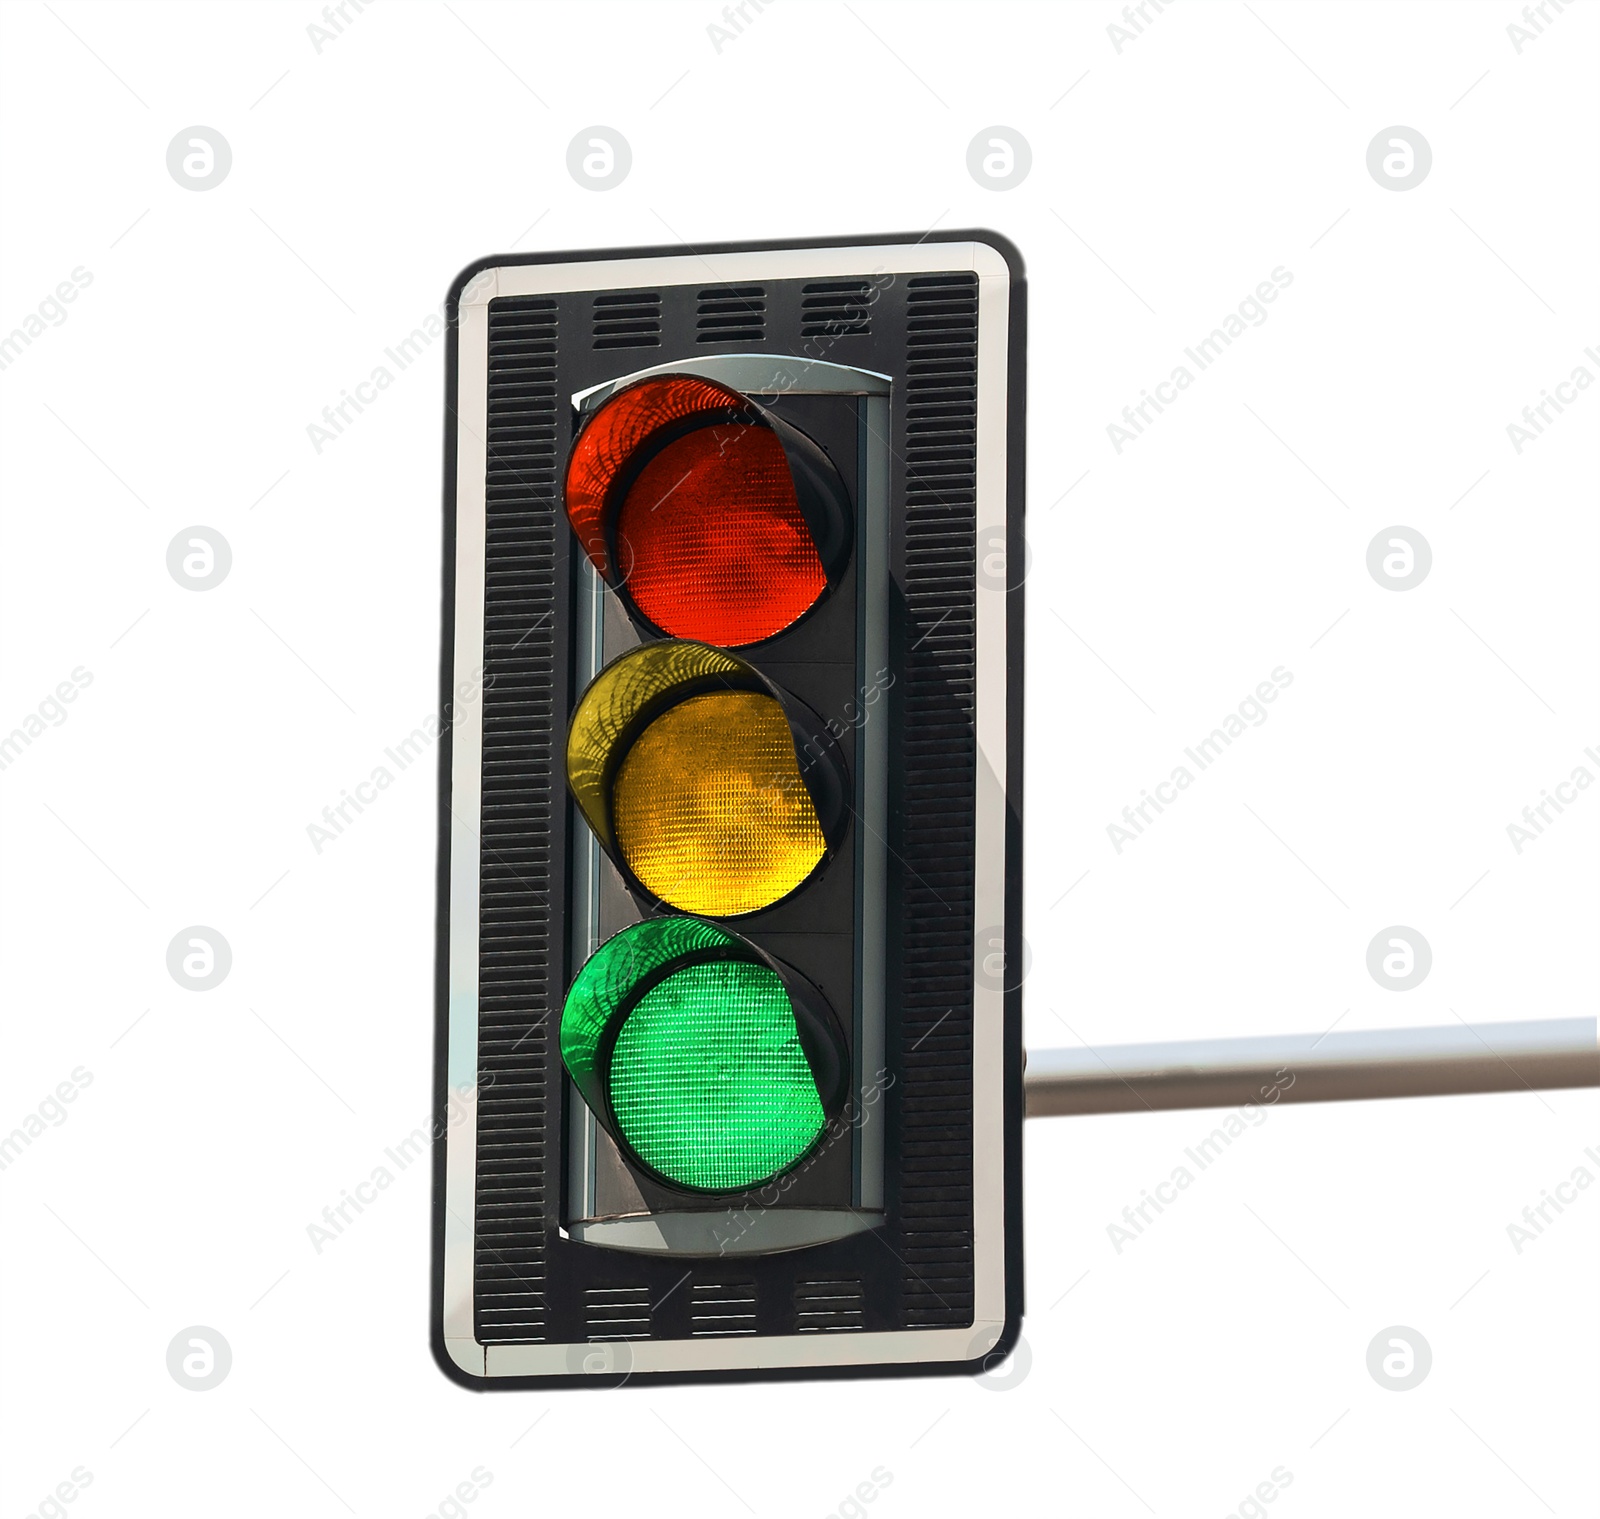 Image of Traffic lights with three signals on white background